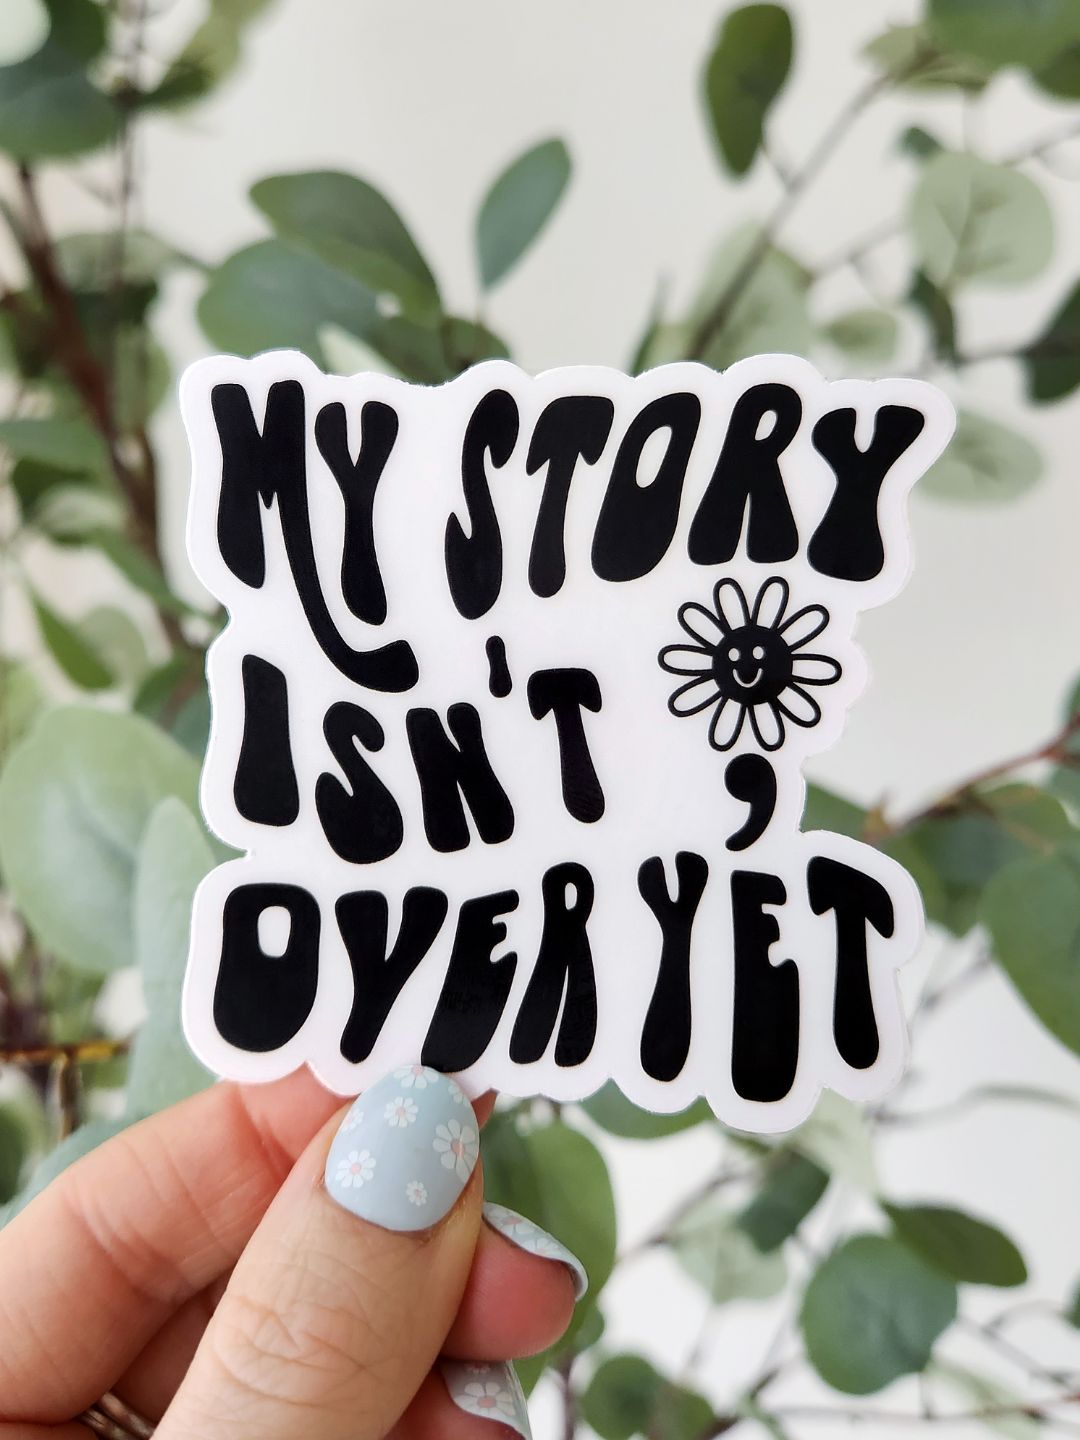 My Story Isn't Over Yet | Clear Sticker